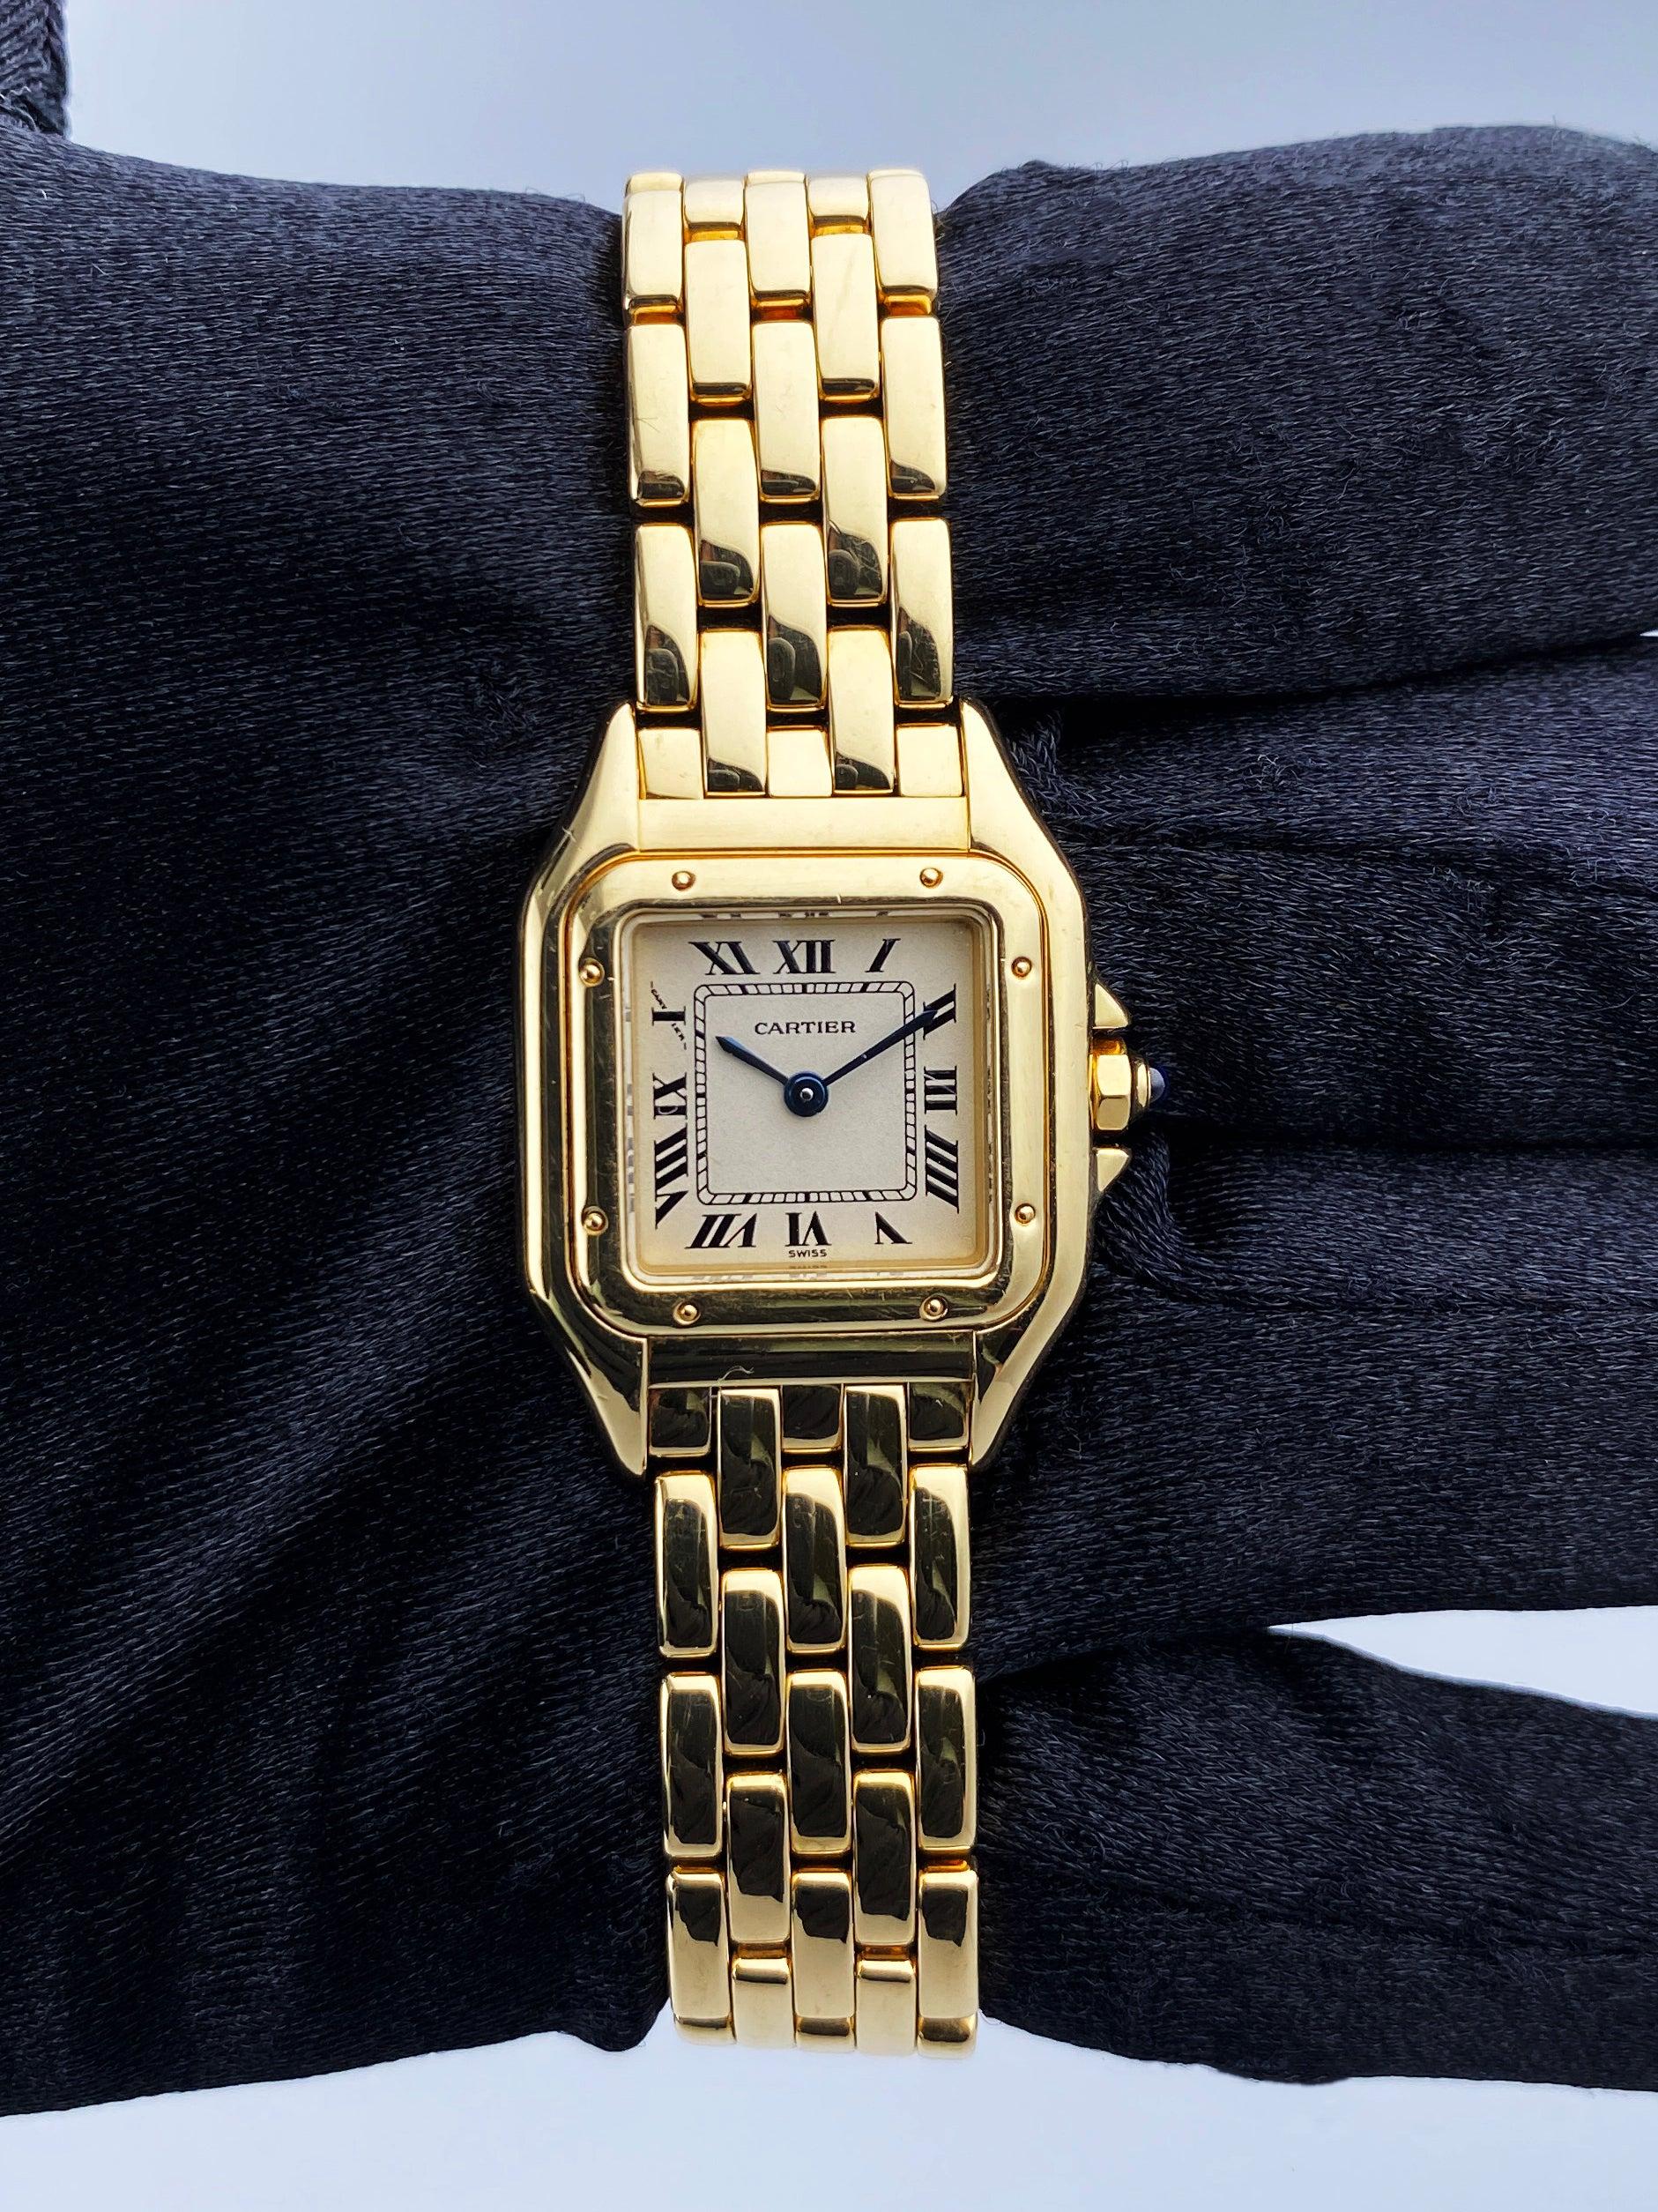 Cartier Panthere 1070 Ladies Watch. 22mm 18K yellow gold case. 18K yellow gold smooth bezel. Off-white dial with blue steel hands and Roman numeral hour markers. Minute markers on the inner dial. 18K yellow gold bracelet with hidden butterfly clasp.